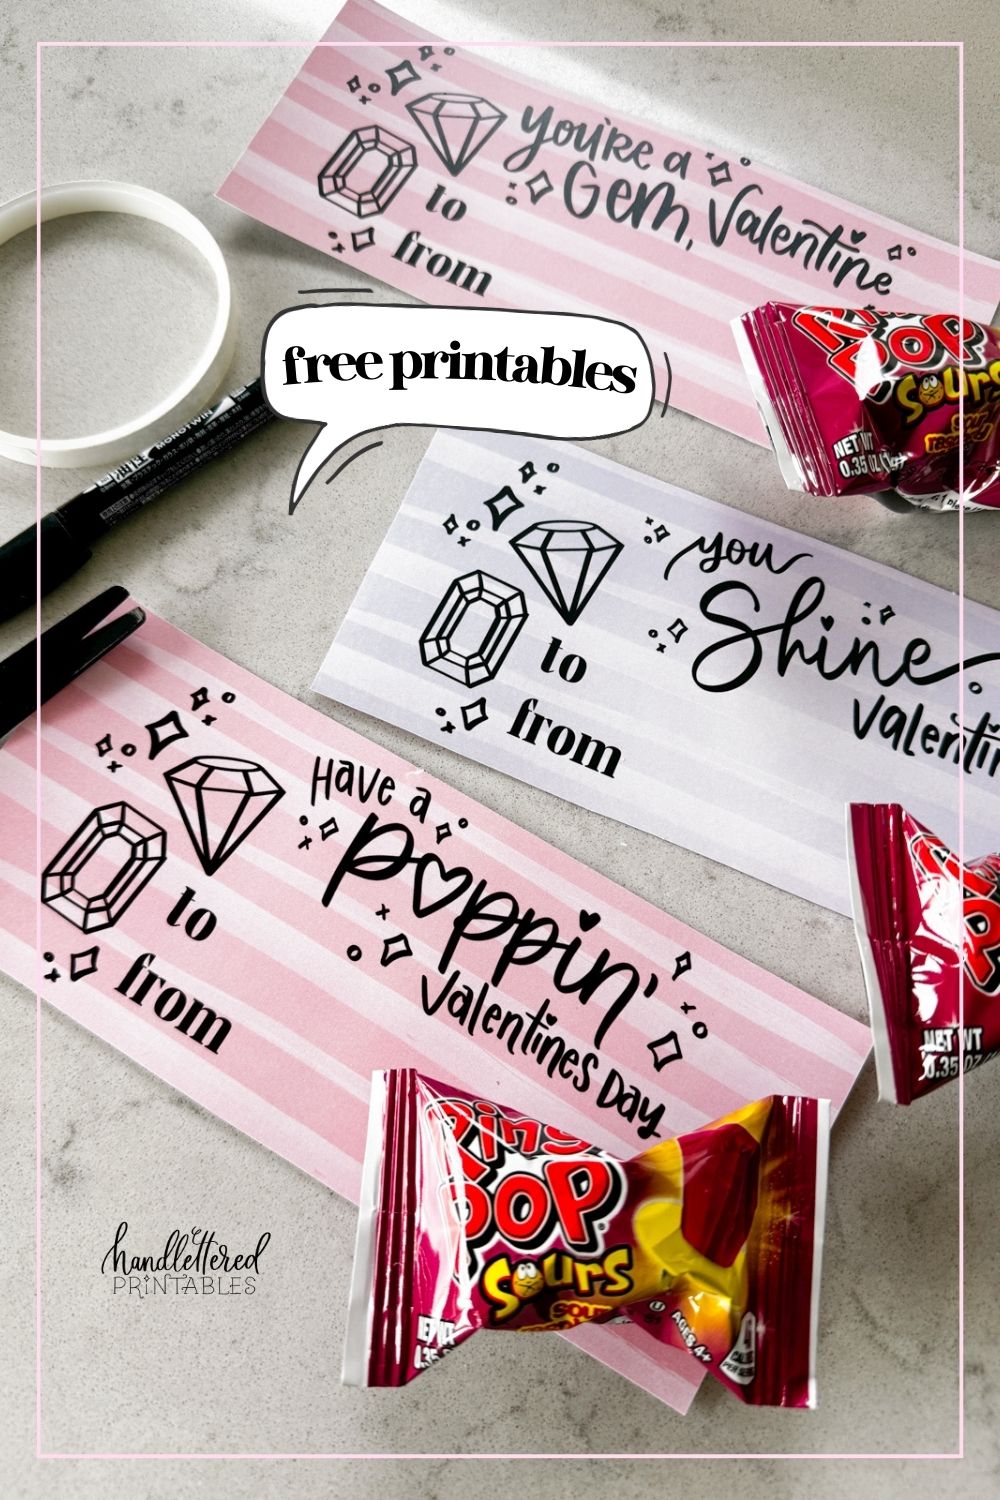 image of printed valentines with a gem theme, designed to pair with ring pops. printed and cut to size on a marble counter shown with ring pops in packaging for each valentine card hand lettered valentines in both pink and purple read:' you're a gem, valentine', 'you shine, valentine', and 'have a poppin' valentine's day' image overlay reads 'free printables'